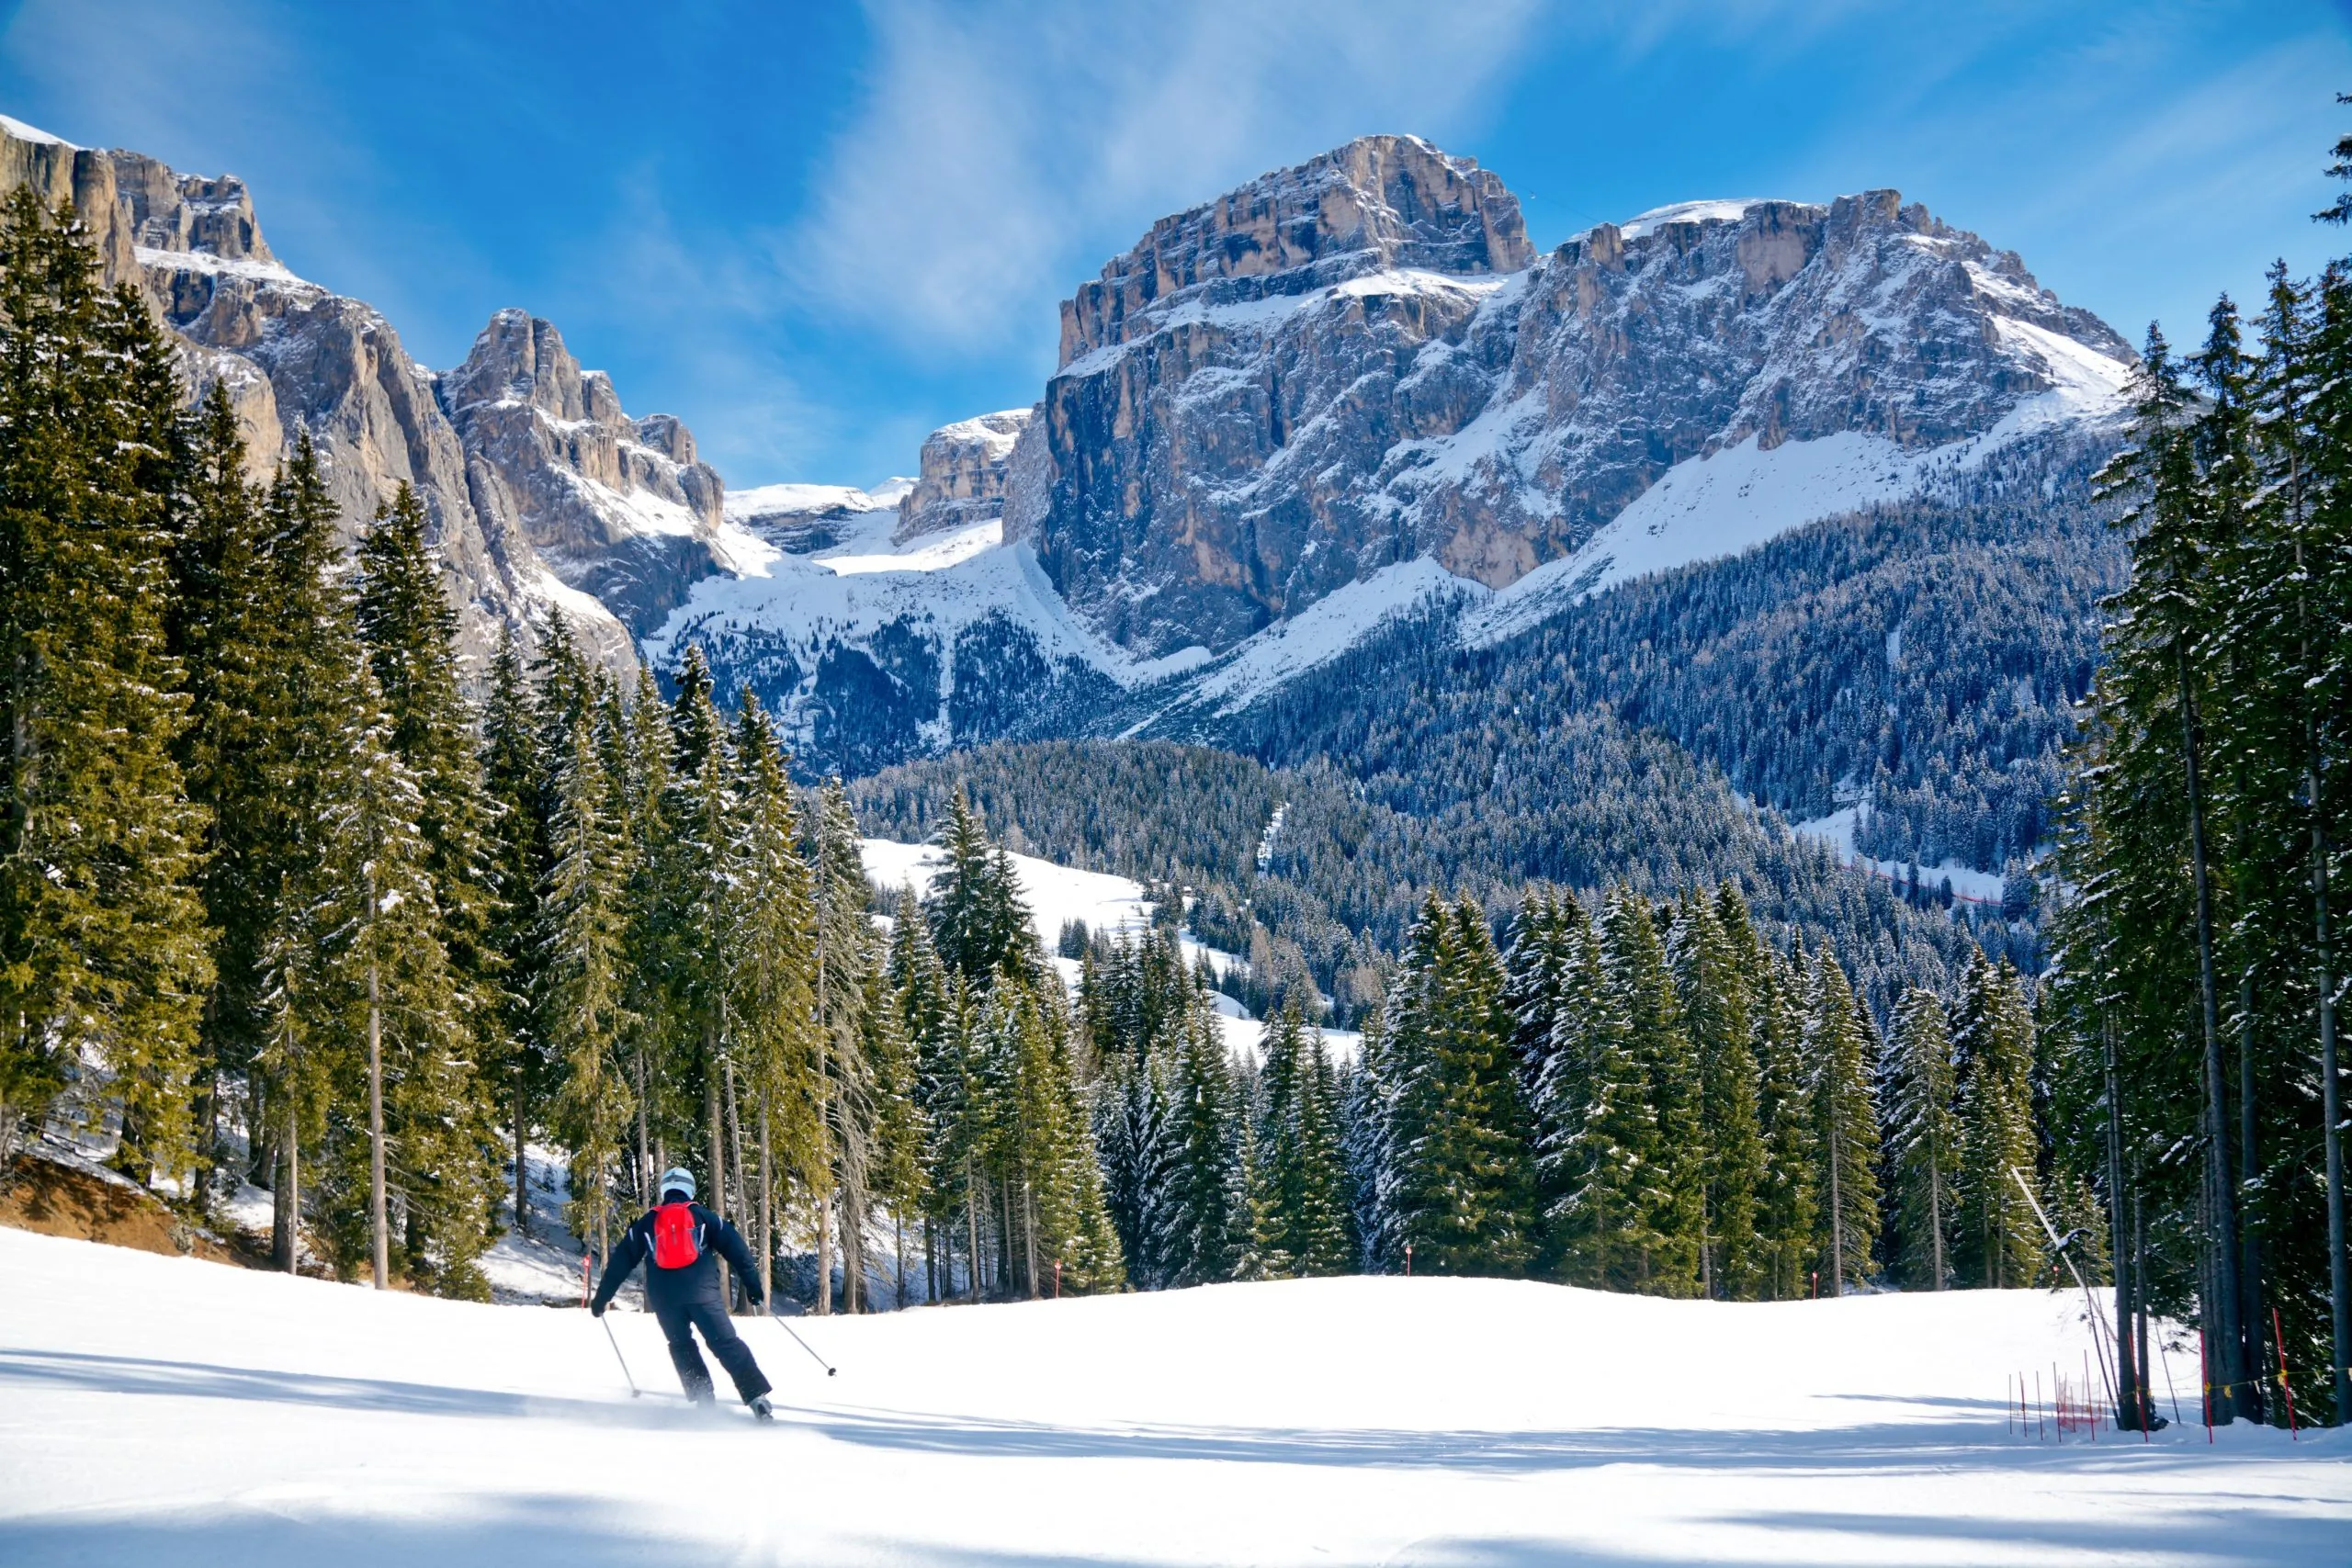 Skiing in the Dolomites.